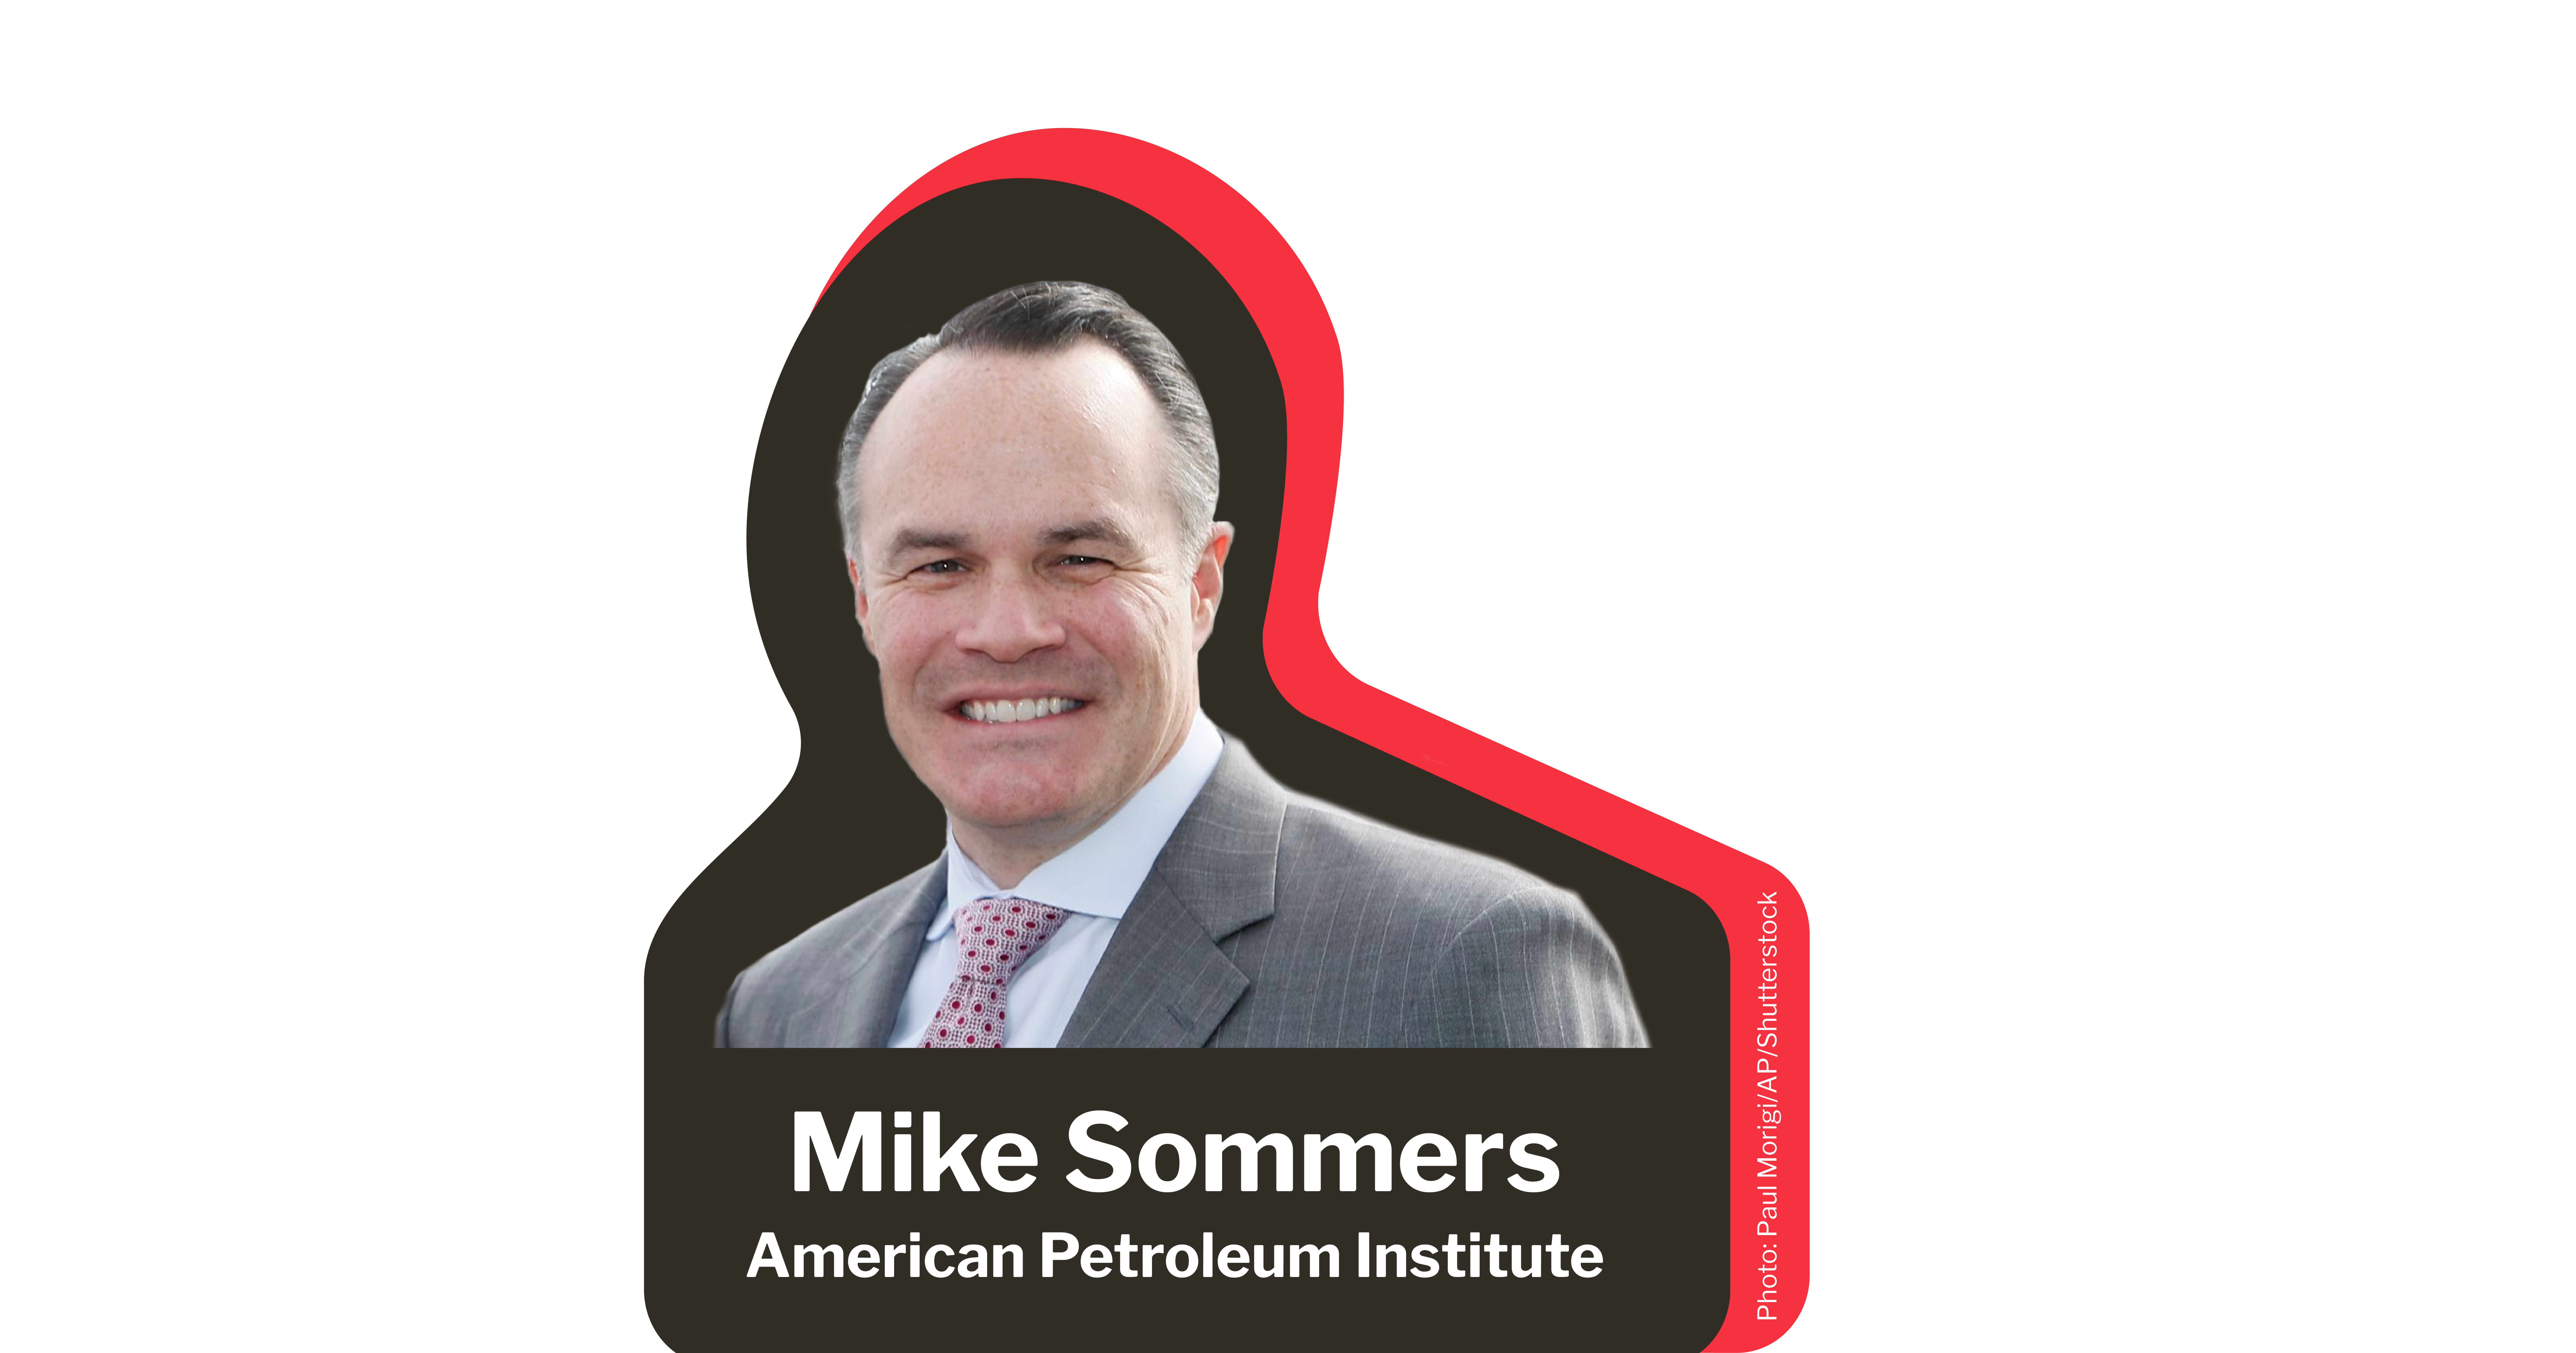 American Petroleum Institute President Mike Sommers